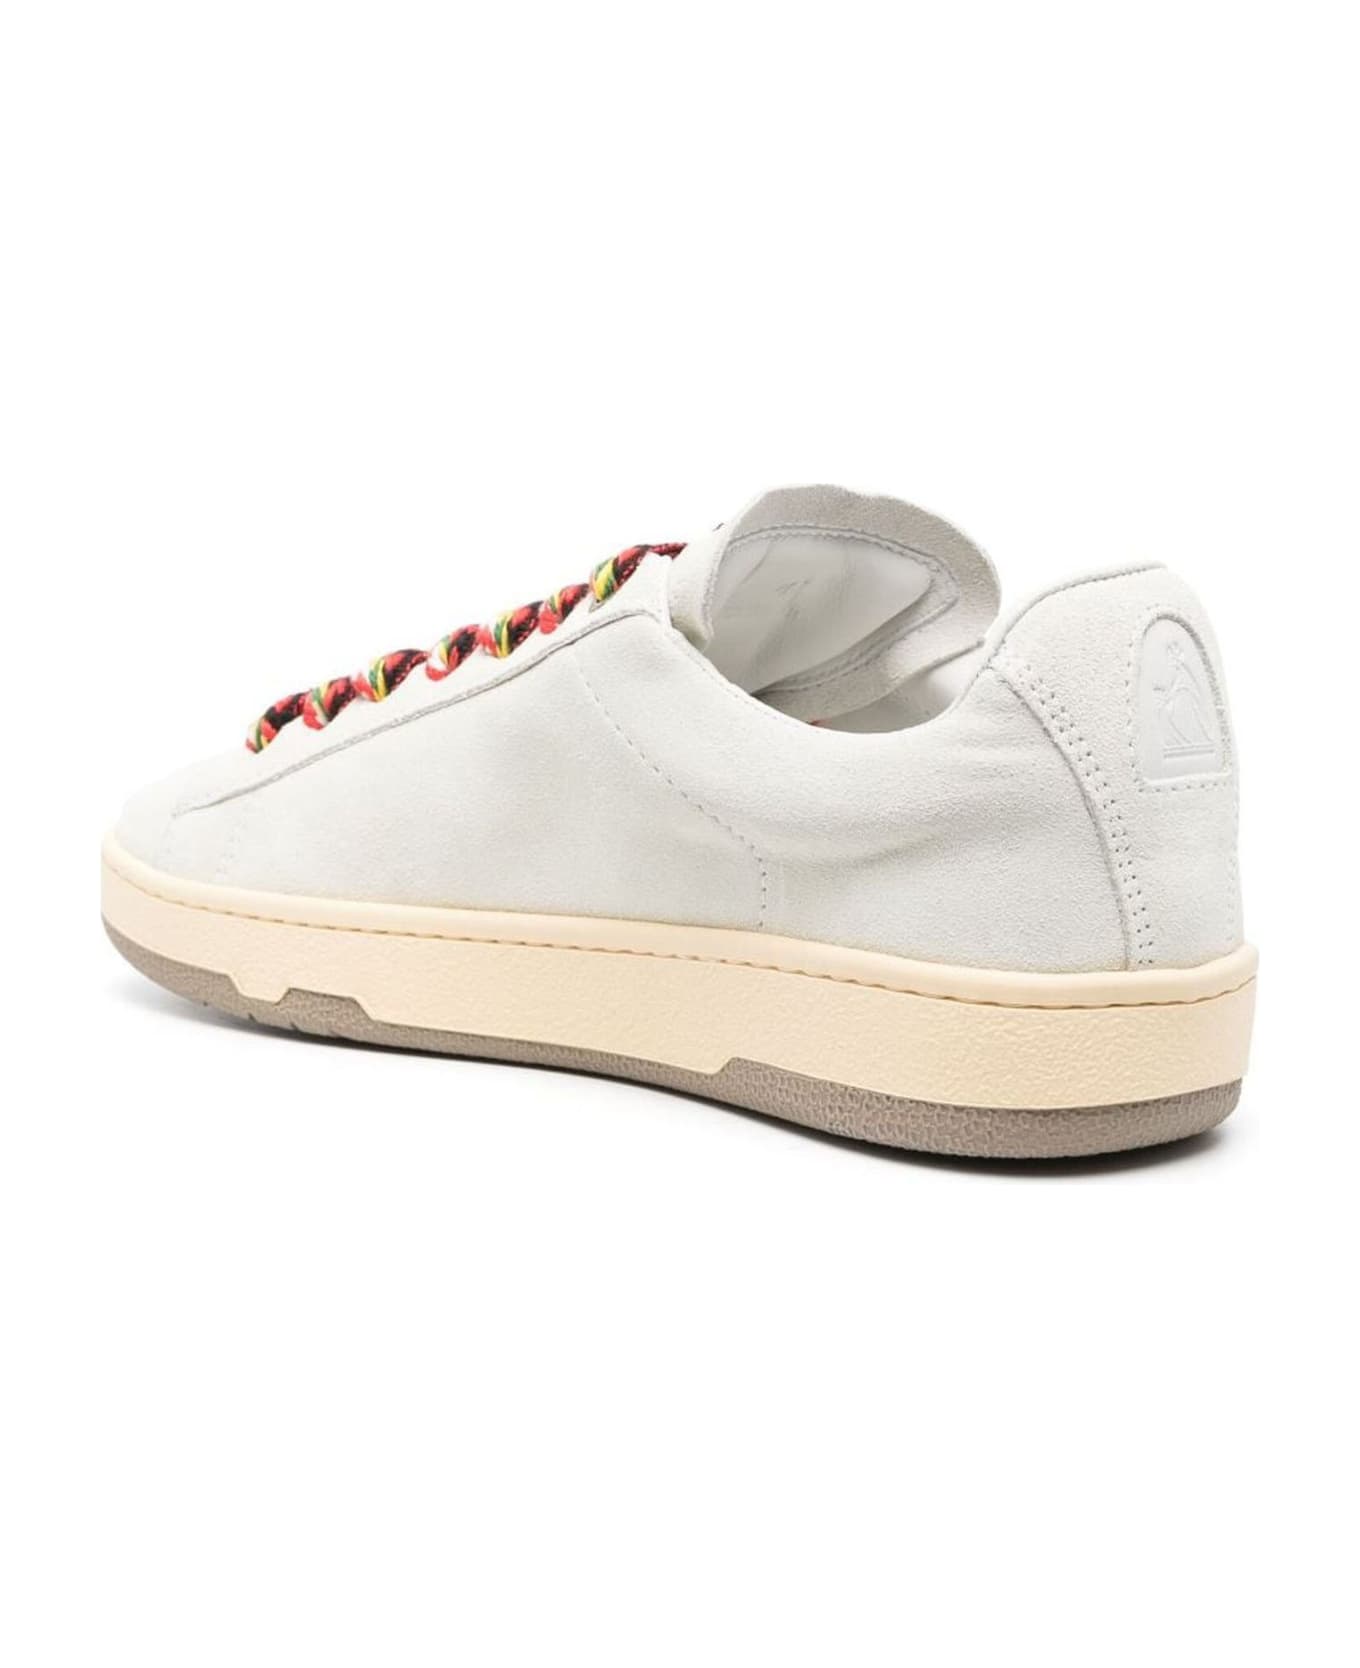 Lanvin White Suede Lite Curb Sneakers